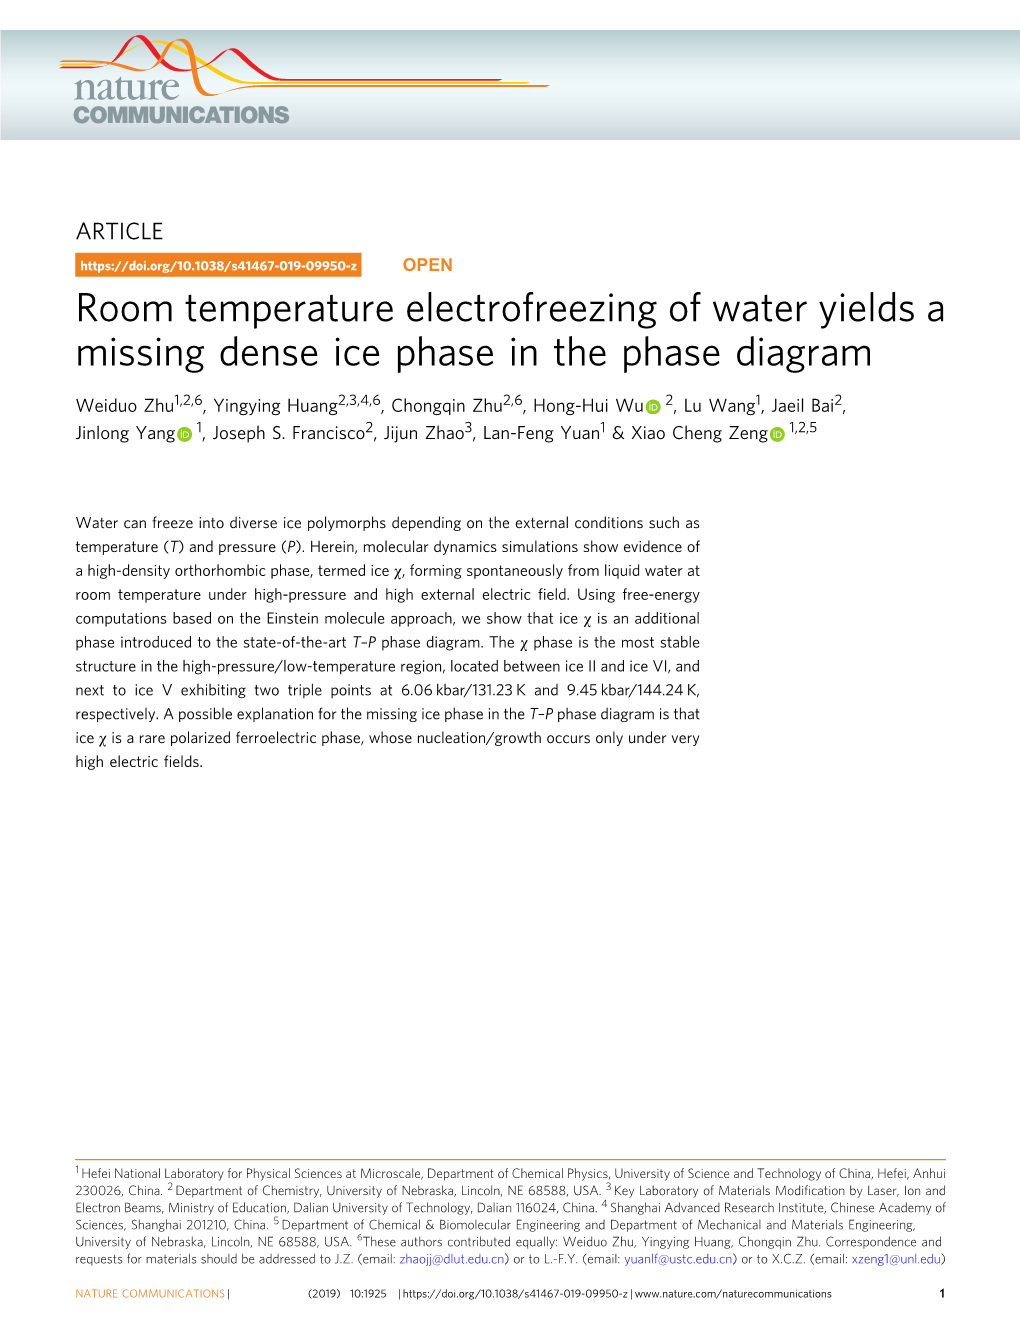 Room Temperature Electrofreezing of Water Yields a Missing Dense Ice Phase in the Phase Diagram